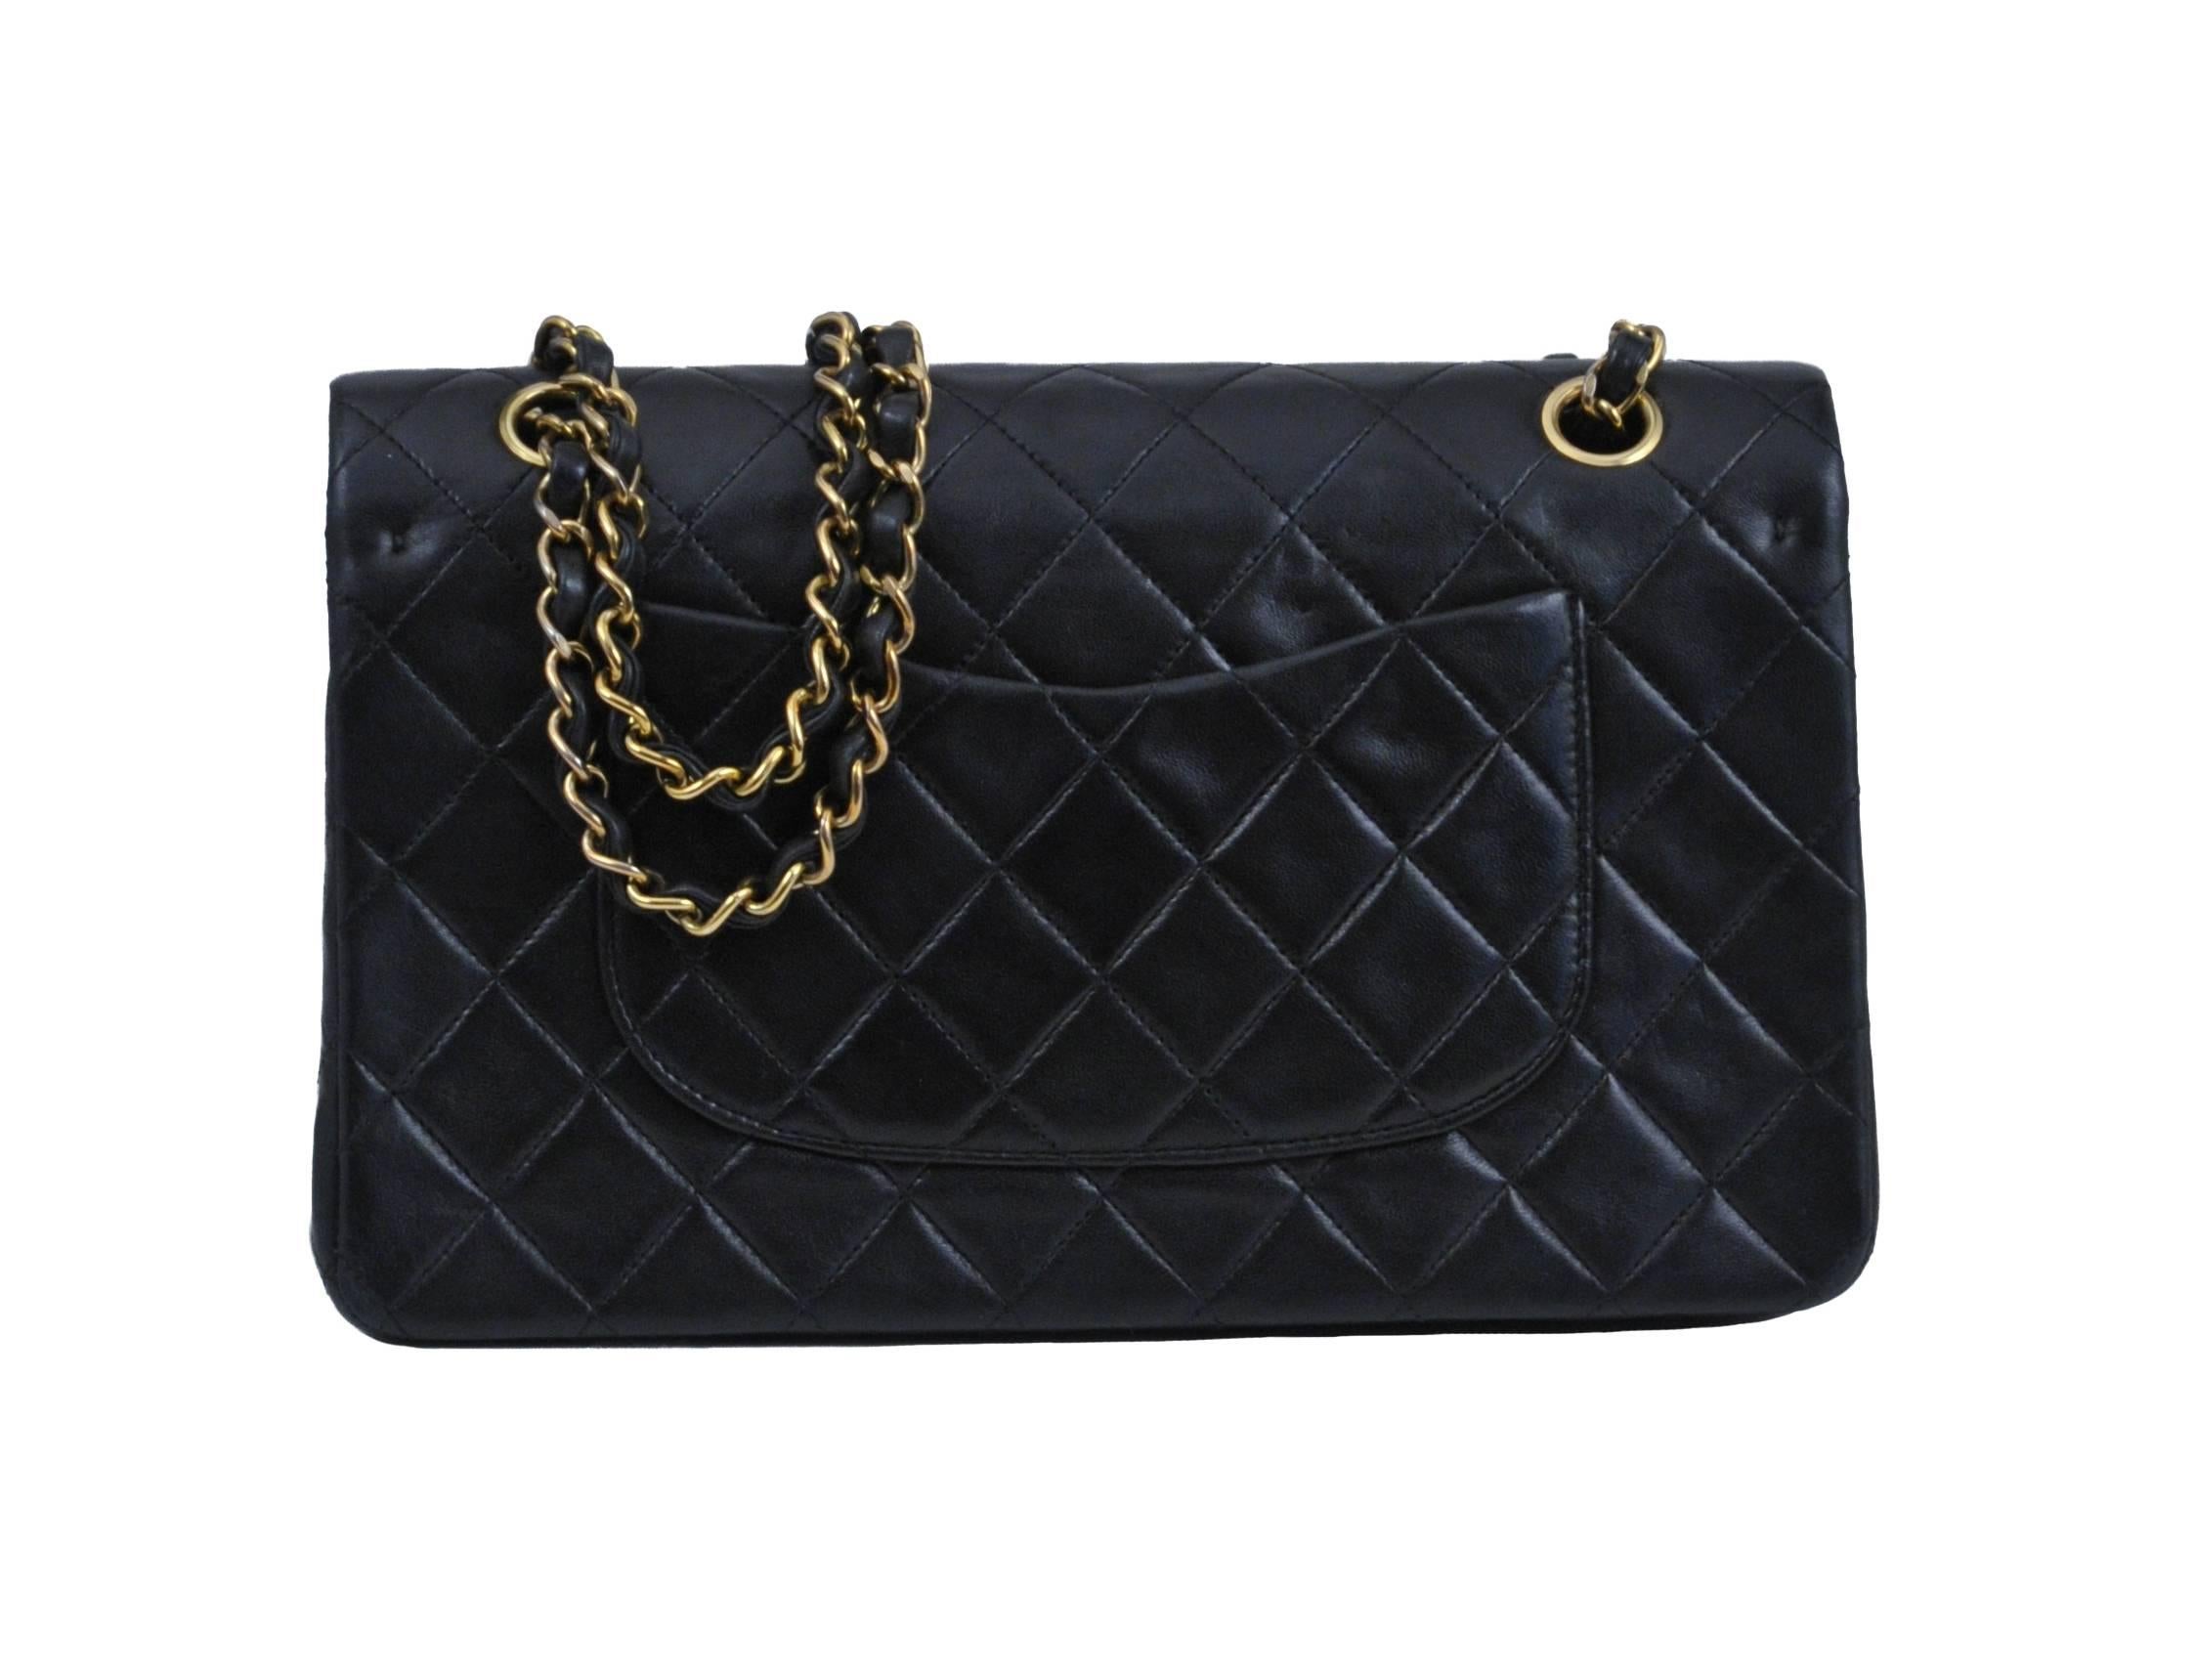 Vintage Chanel Classic 2.55 double flap bag in black quilted lambskin featuring a leather lining, iconic leather and gold tone chain woven straps, a classic patch pocket at the back, a gold tone turn-lock closure at the front and a zip pocket on the